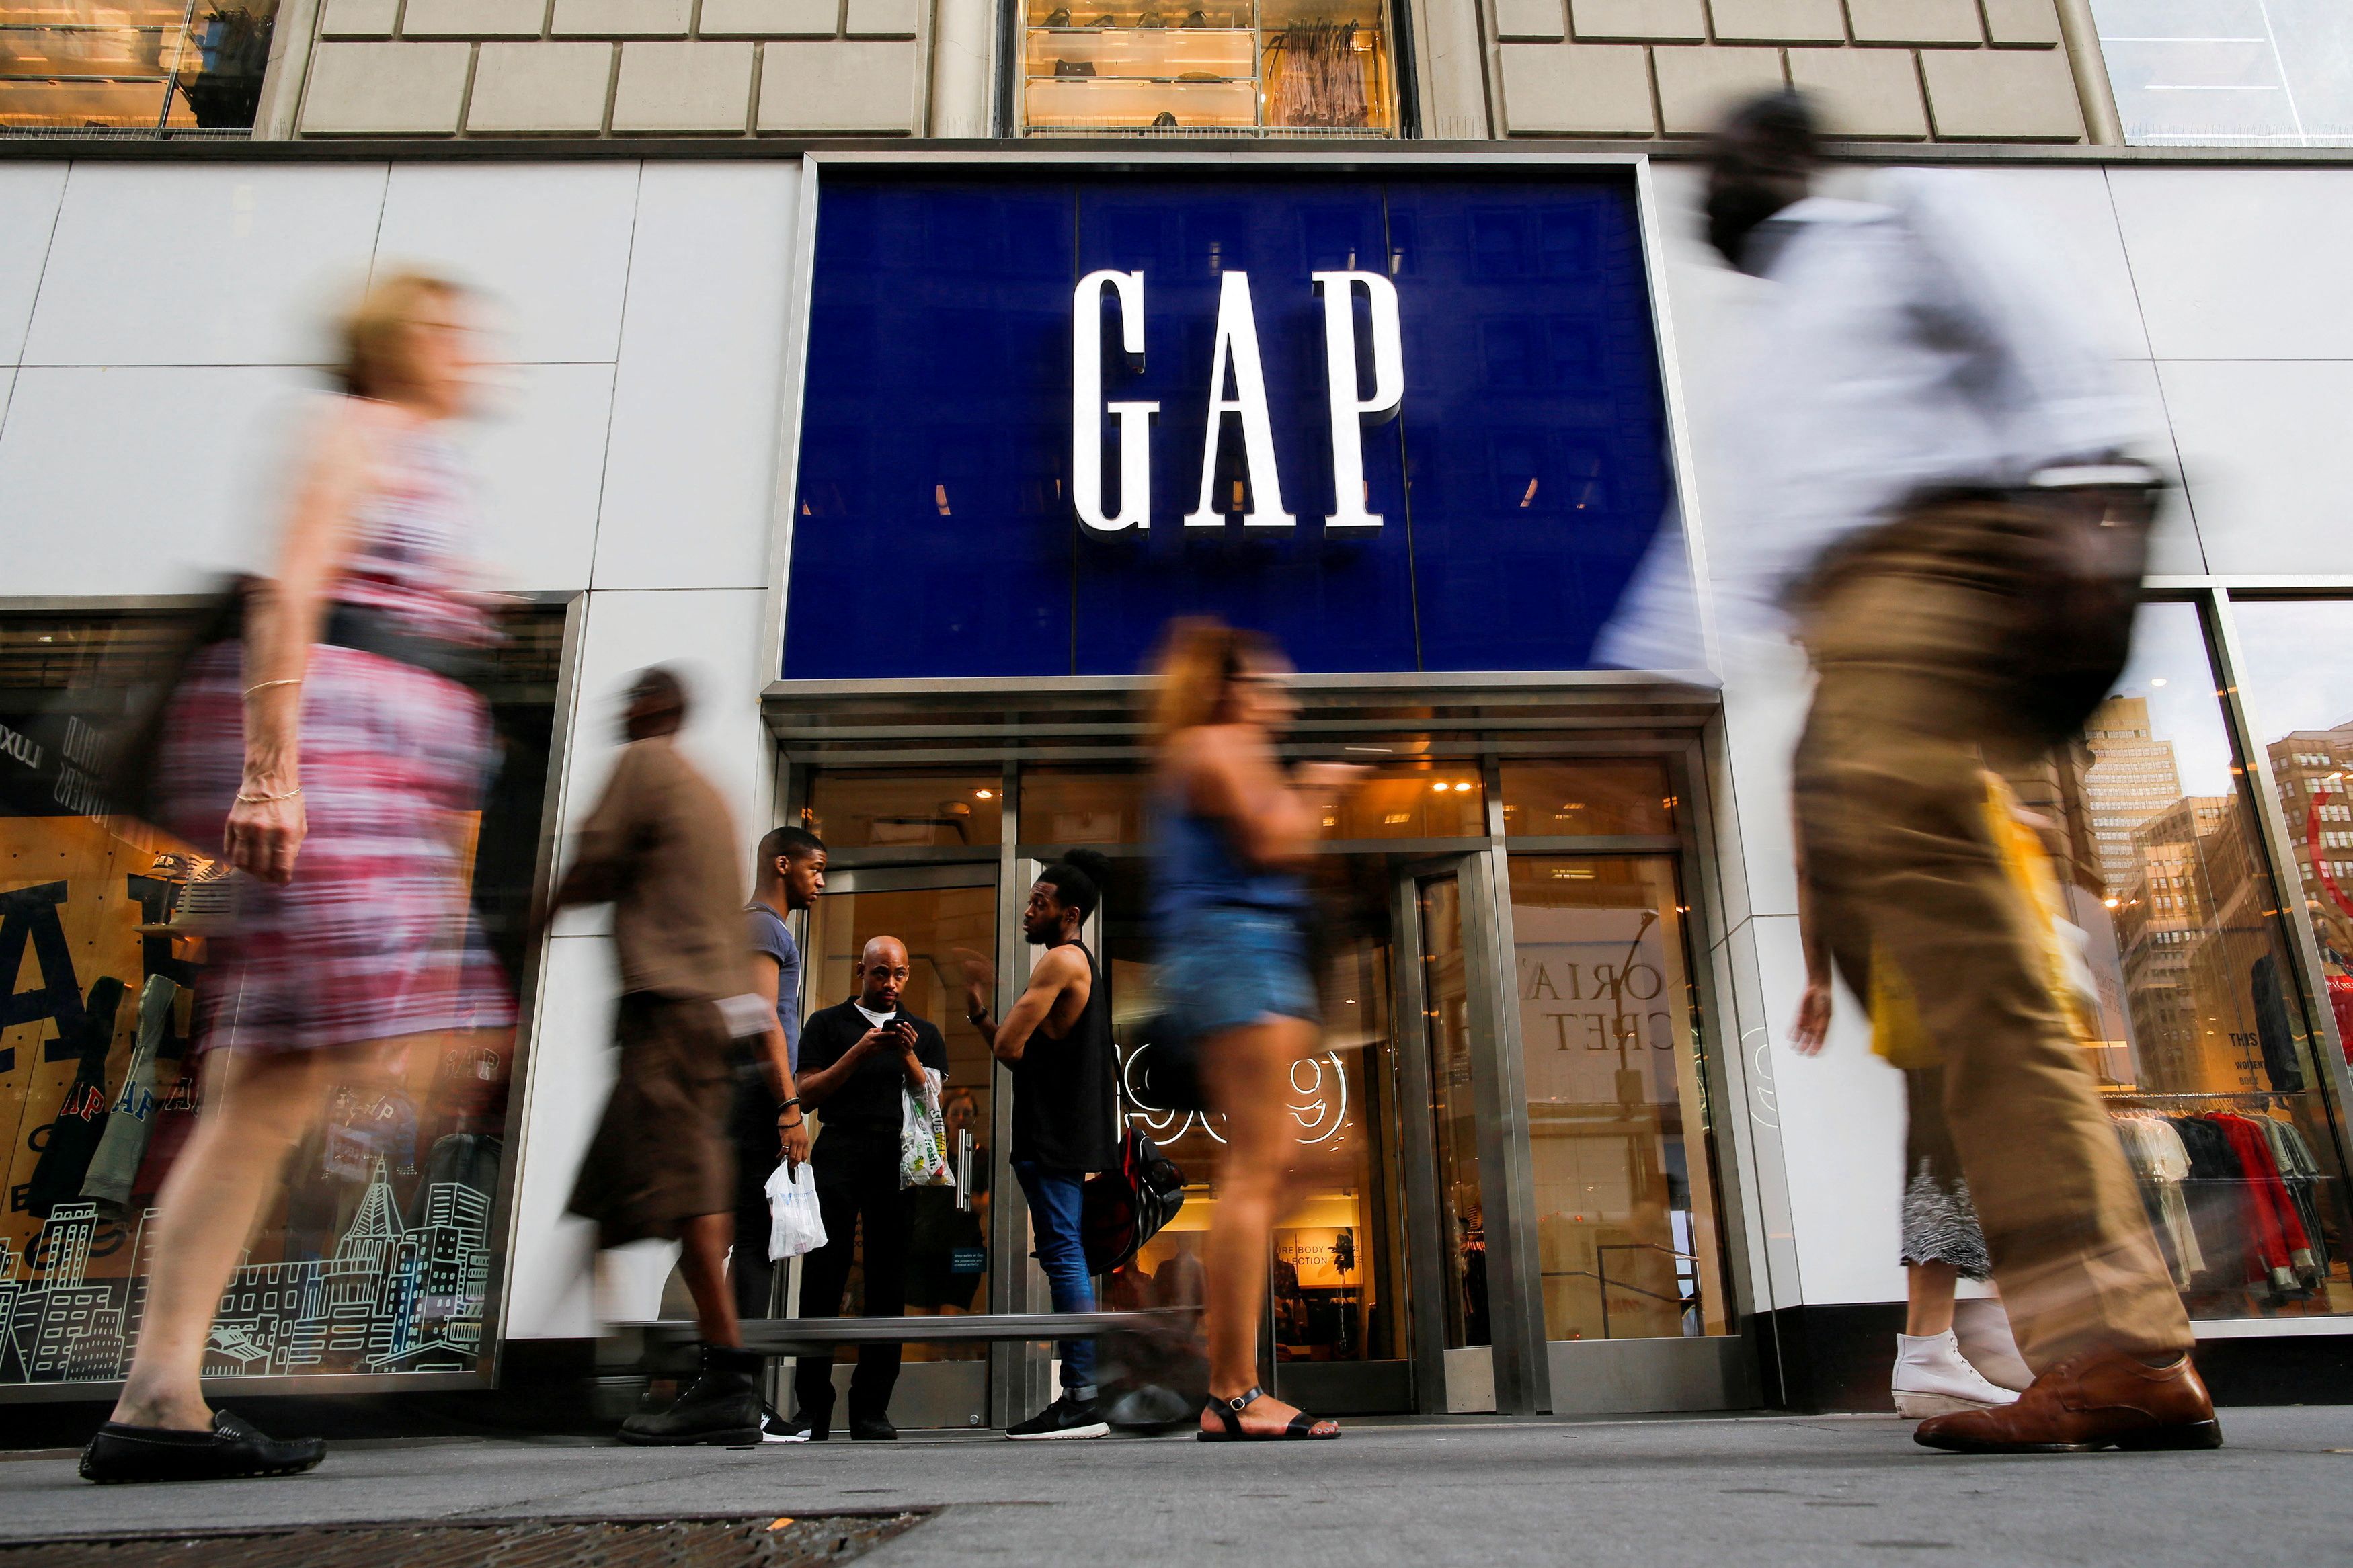 People pass by the GAP clothing retail store in Manhattan, New York